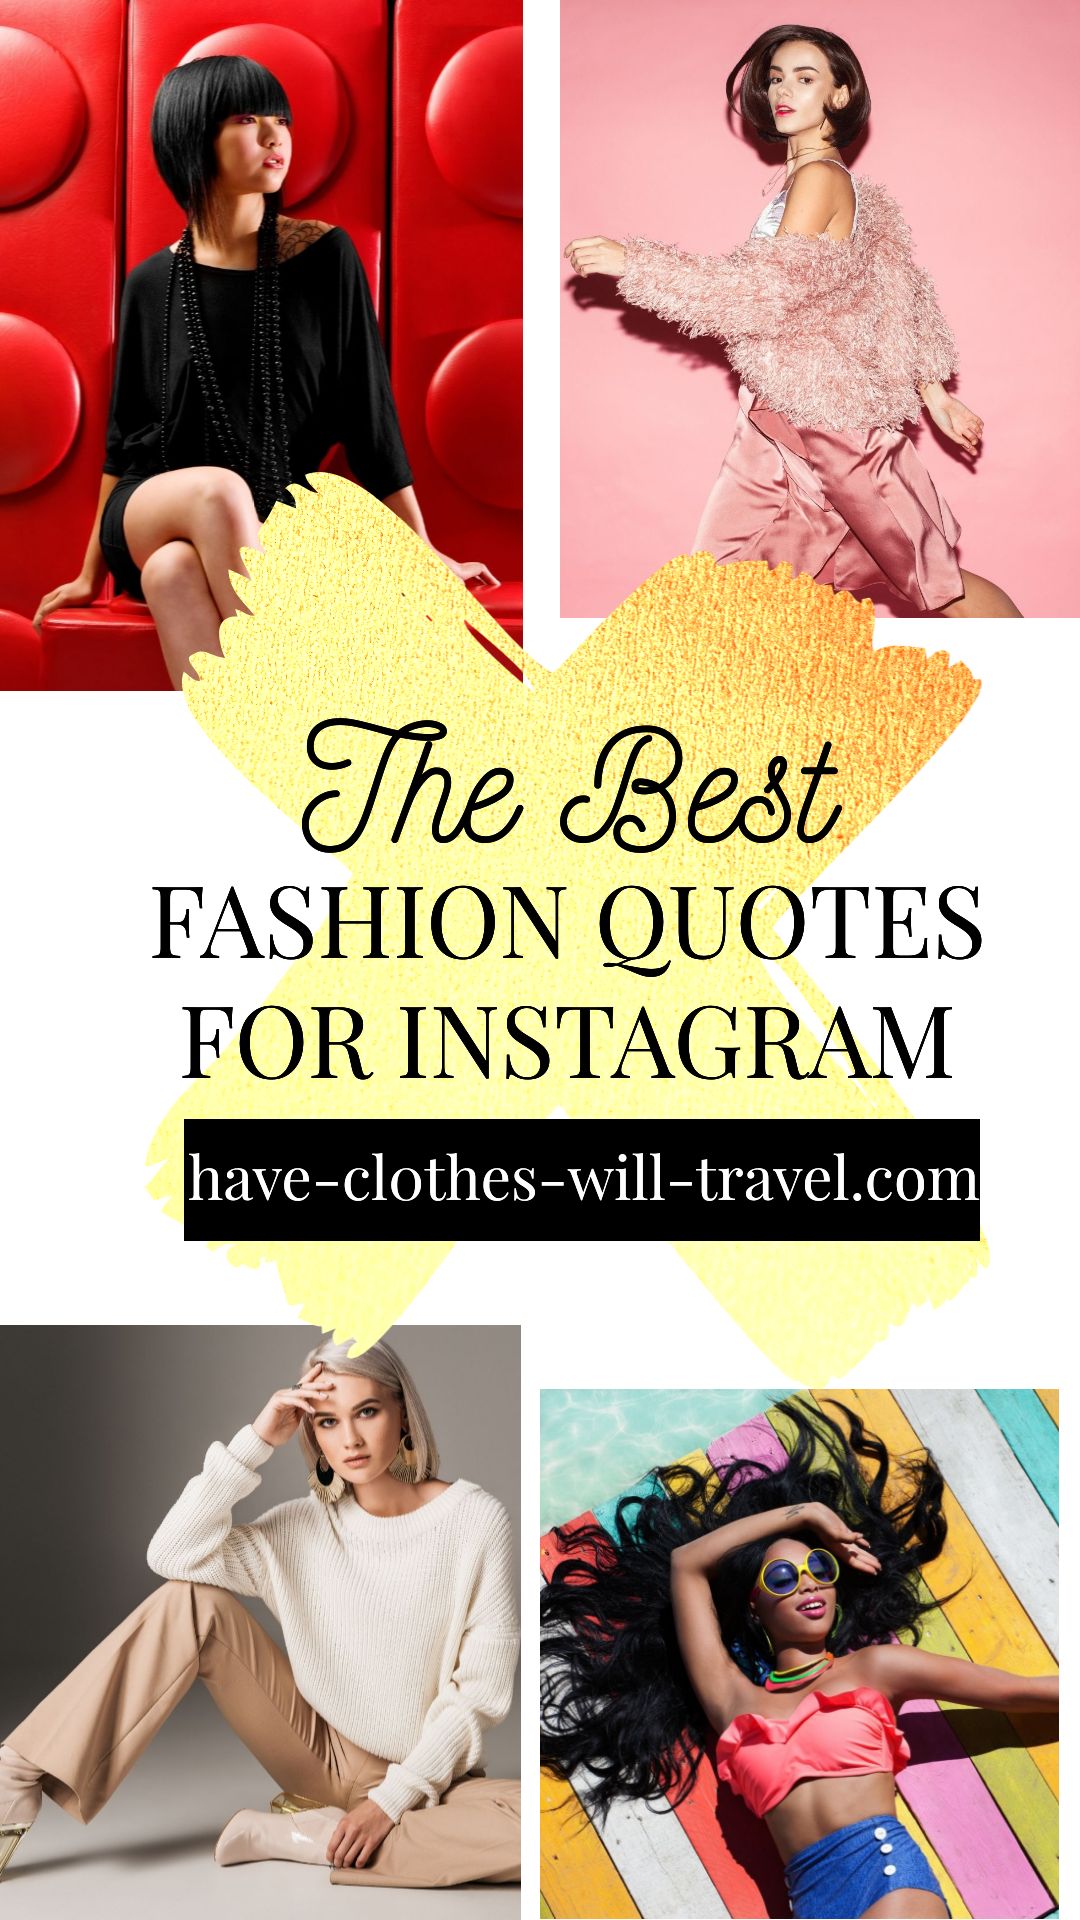 A collage of four high-fashion photoshoot images of women posing wearing luxury outfits. Text in the center of the image says "the best fashion quotes for Instagram" and "have-clothes-will-travel.com"